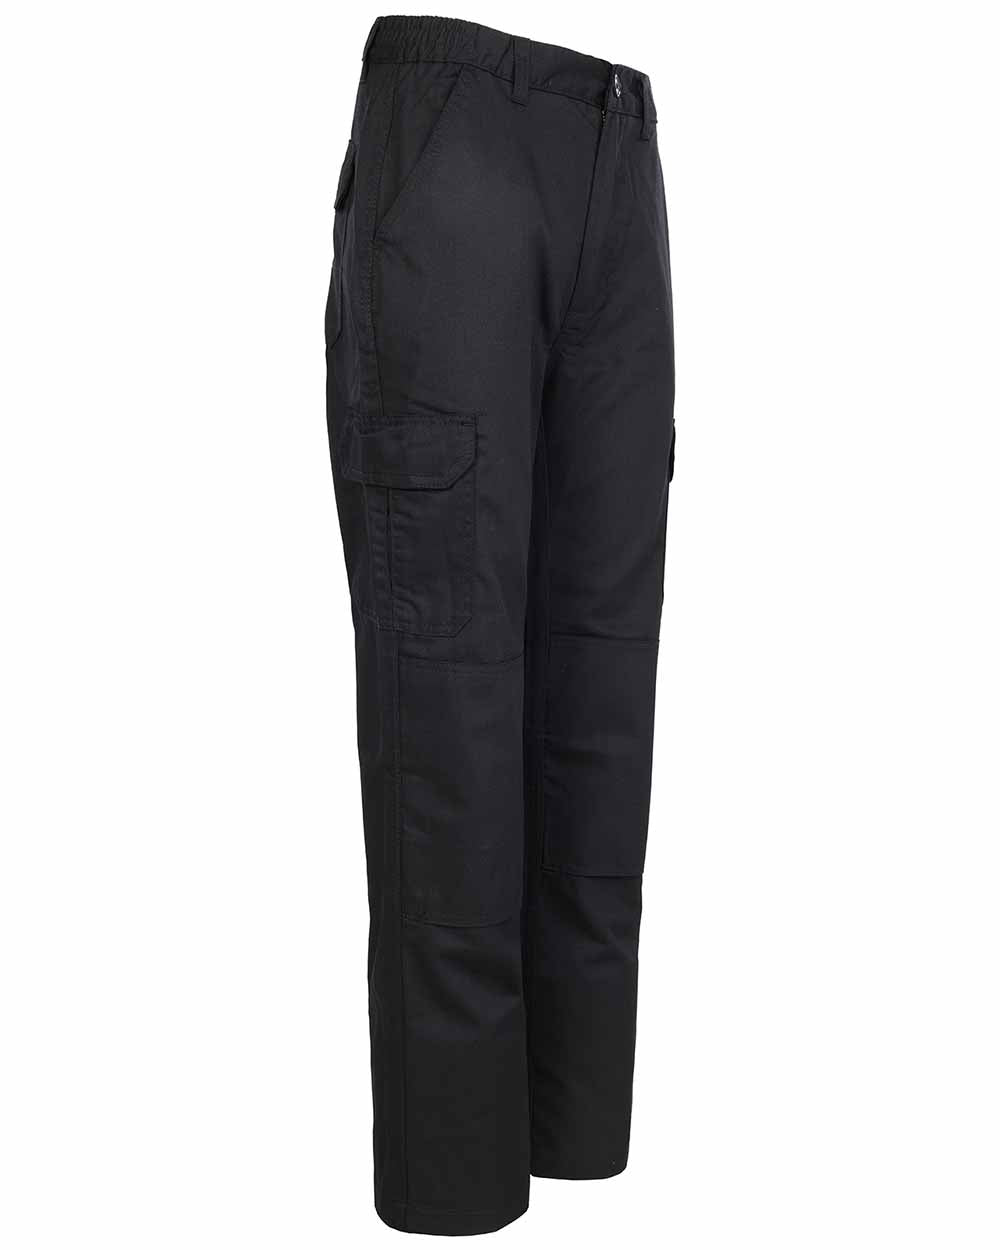 Black coloured Fort Workforce Trousers on white background 